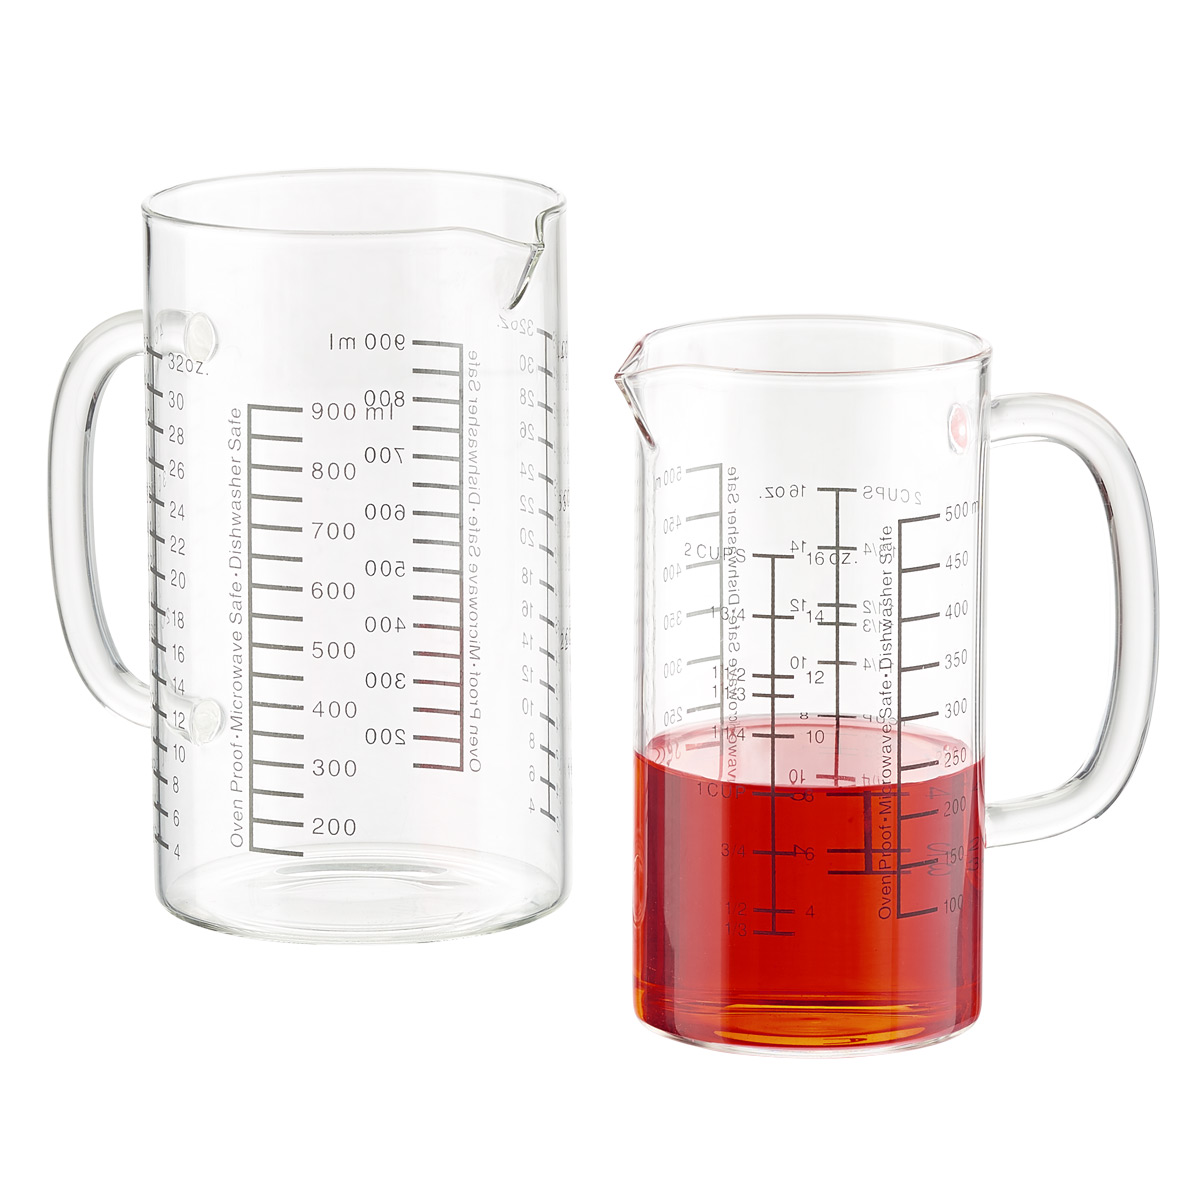 https://www.containerstore.com/catalogimages/379596/10079225g-borosilicate-measuring-cup.jpg